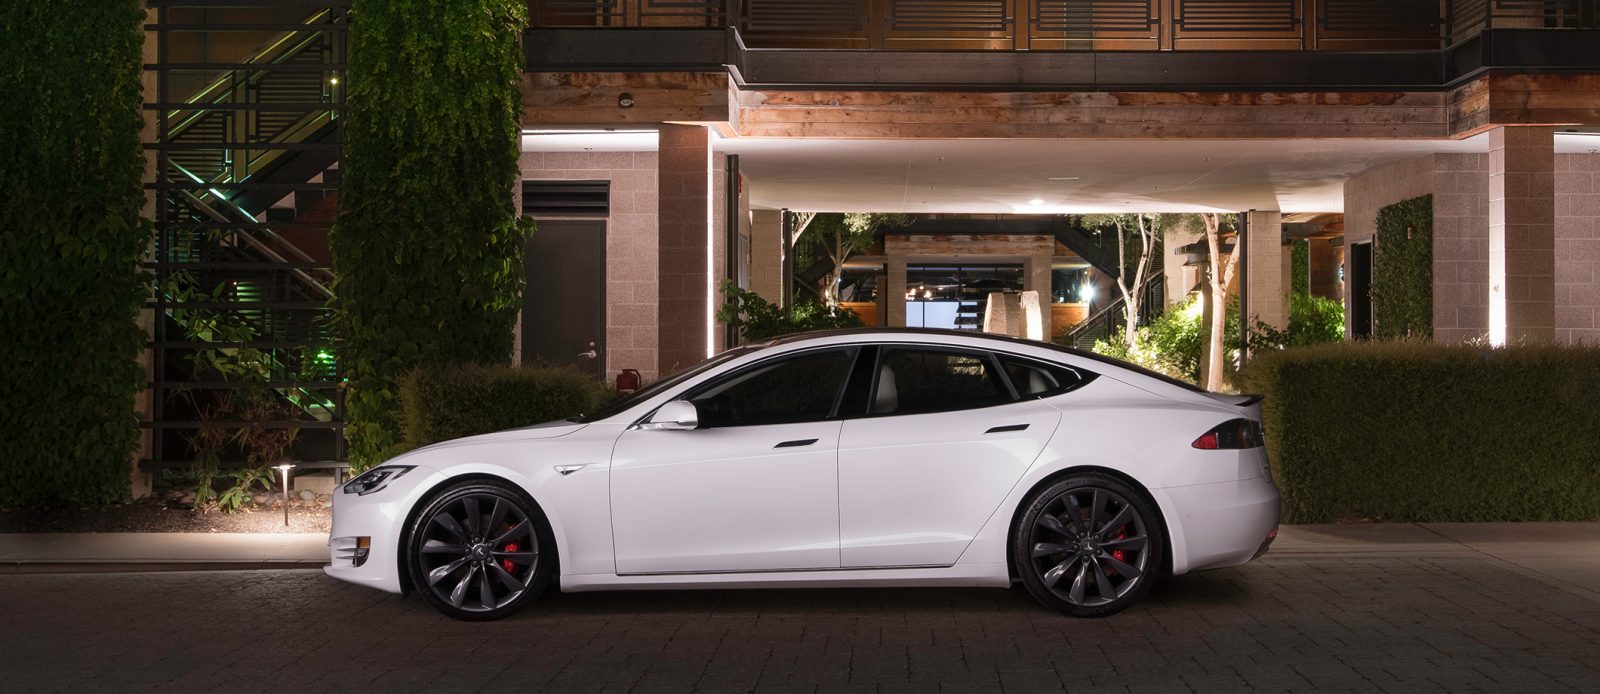 tesla testing new charging solutions for apartments building